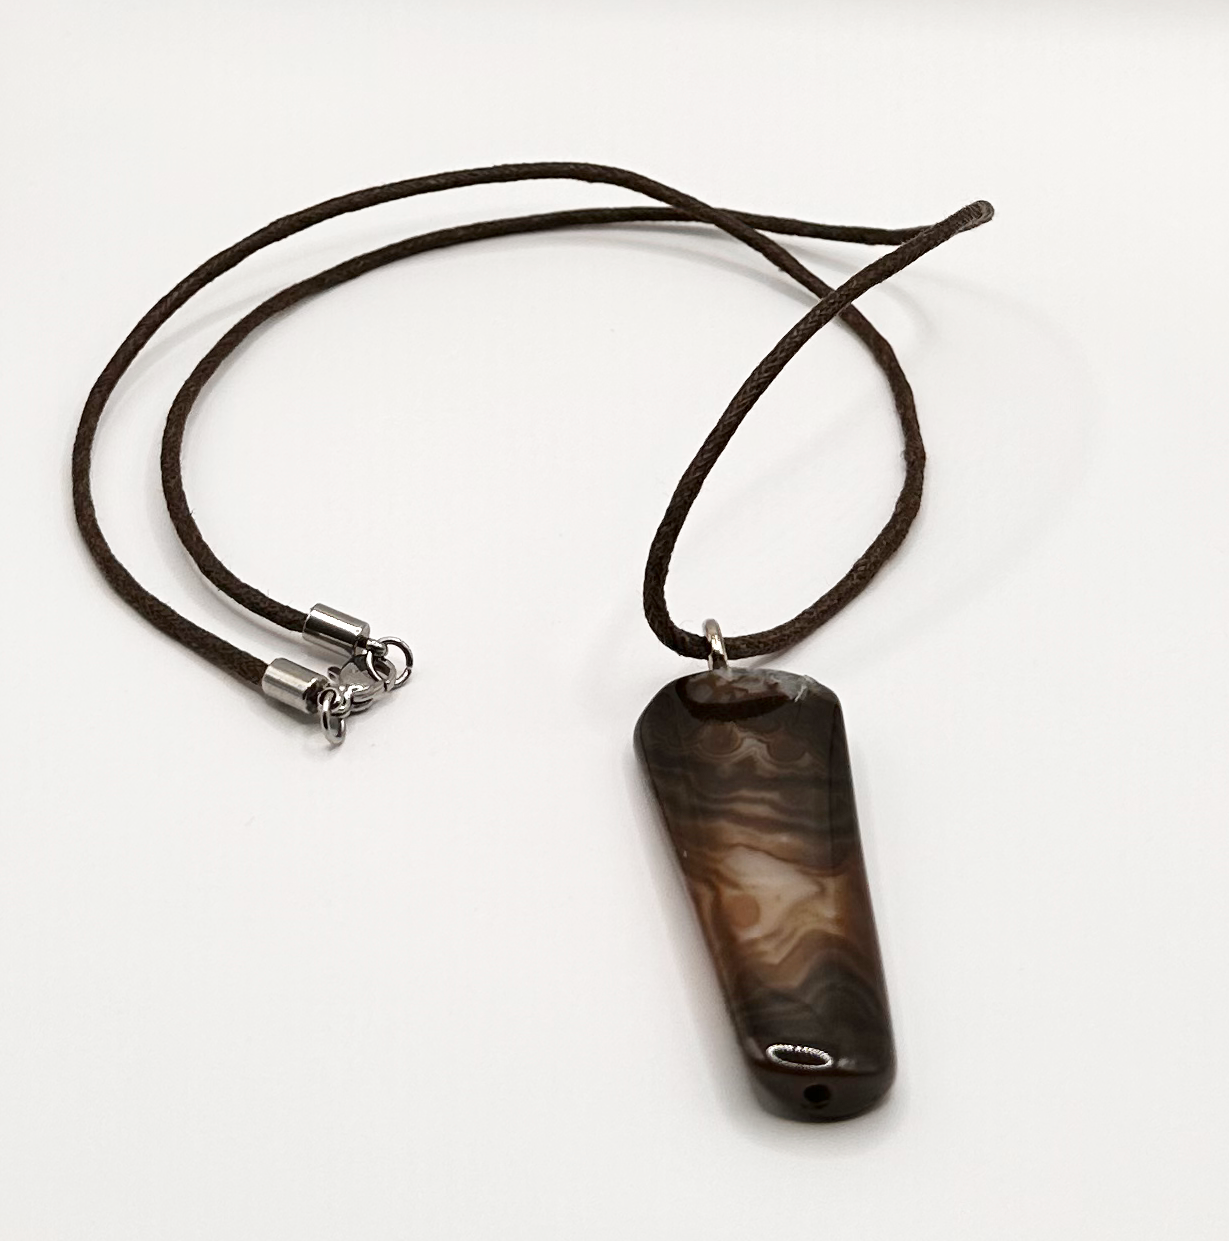 Polished Agate Stone Pendant on a Durable Black Cotton Cord Necklace